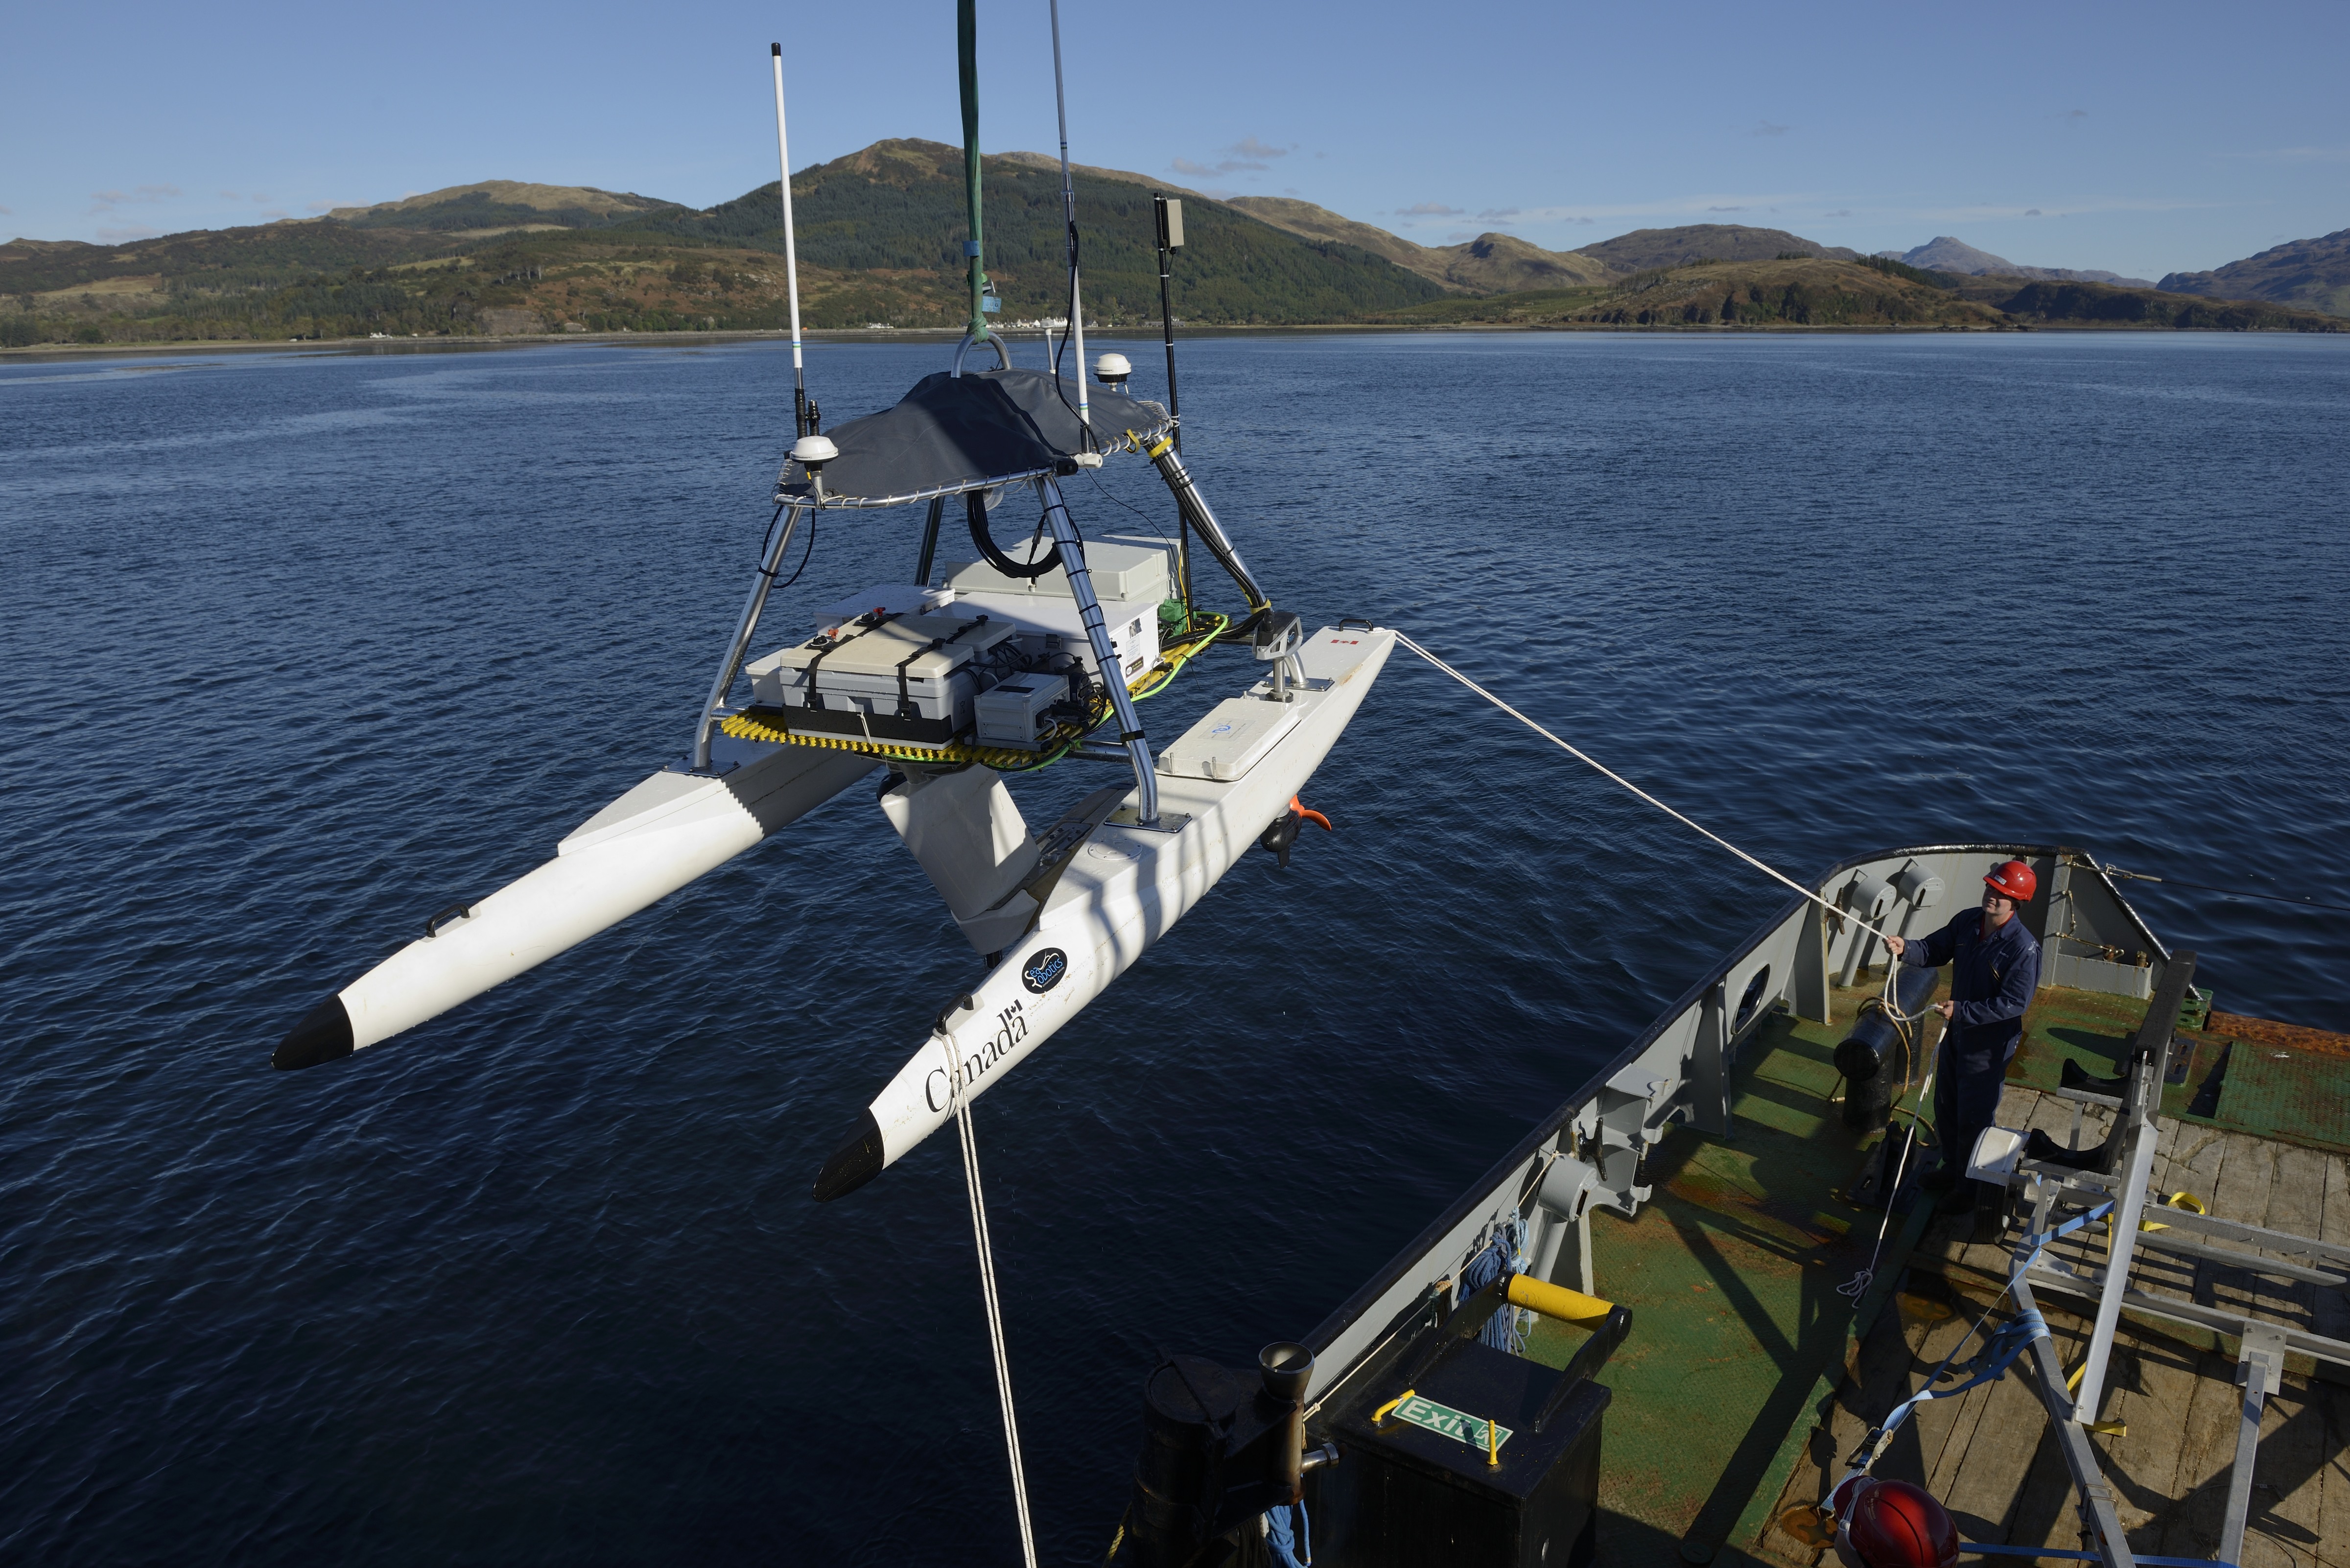 The ship’s crew uses a crane to launch Defence Research and Development Canada’s unmanned surface vehicle USV-2600 into the water at Loch Alsh. Photo by Janice Lang, DRDC